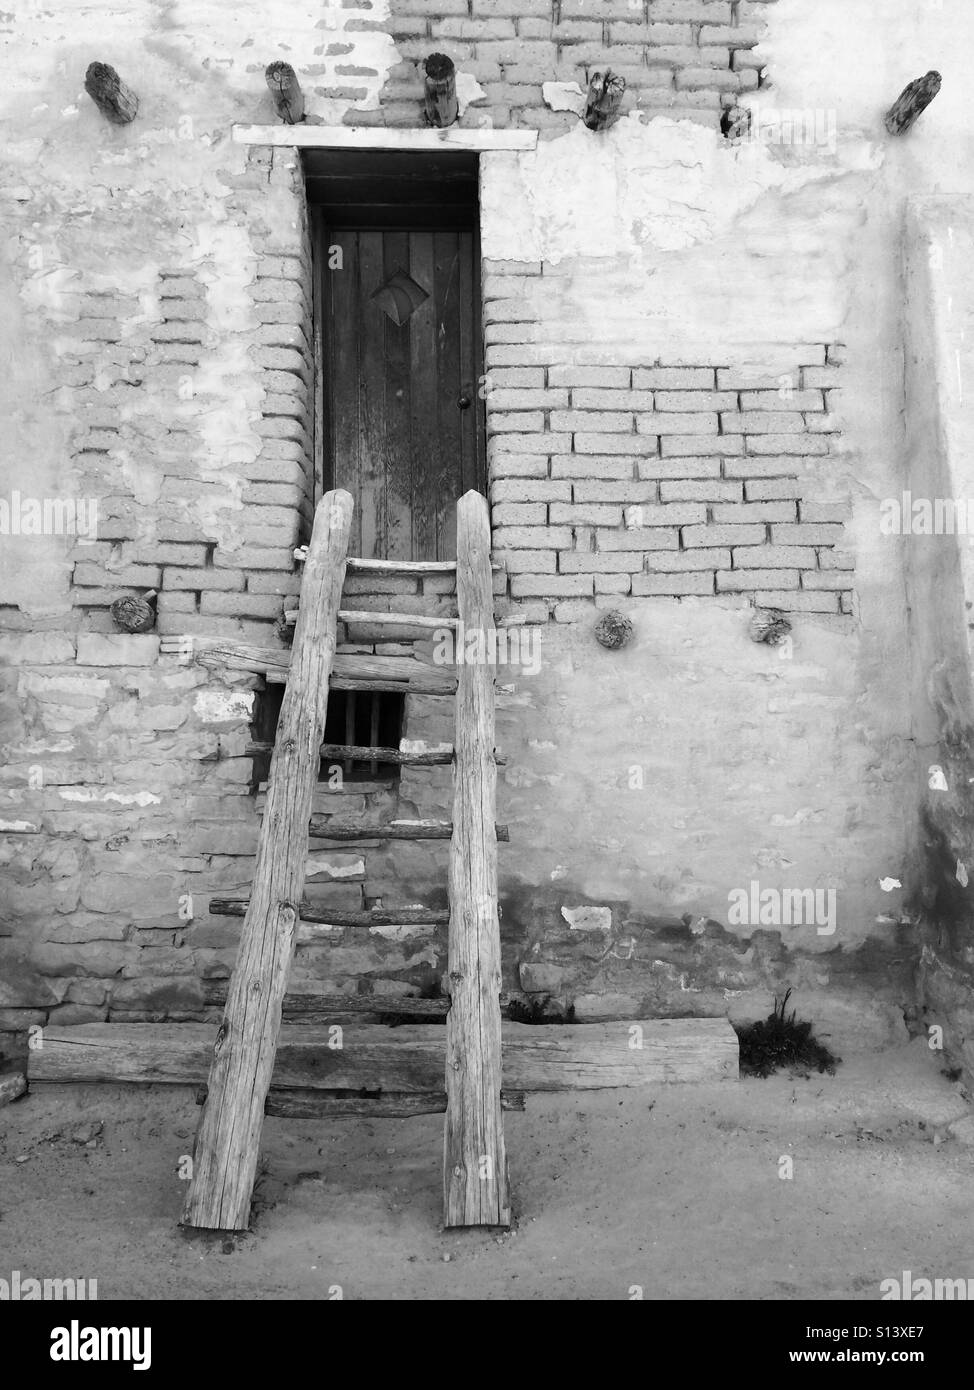 Detail of a ladder and wall in the old town of Acoma, New Mexico. Stock Photo